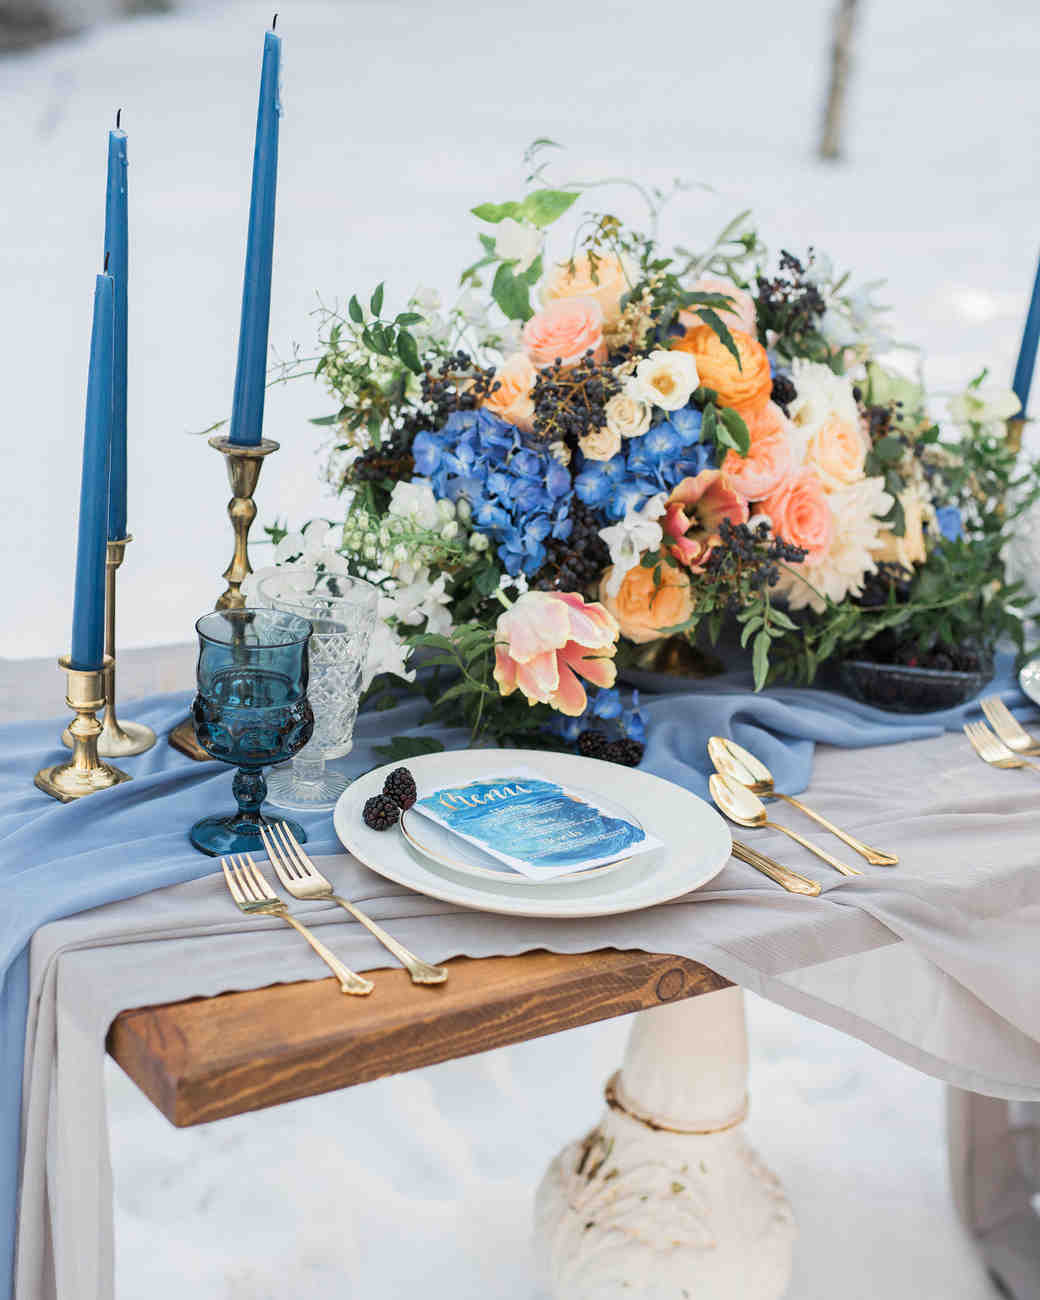 25 Jewel-Toned Wedding Centerpieces Sure to Wow Your Guests | Martha ...